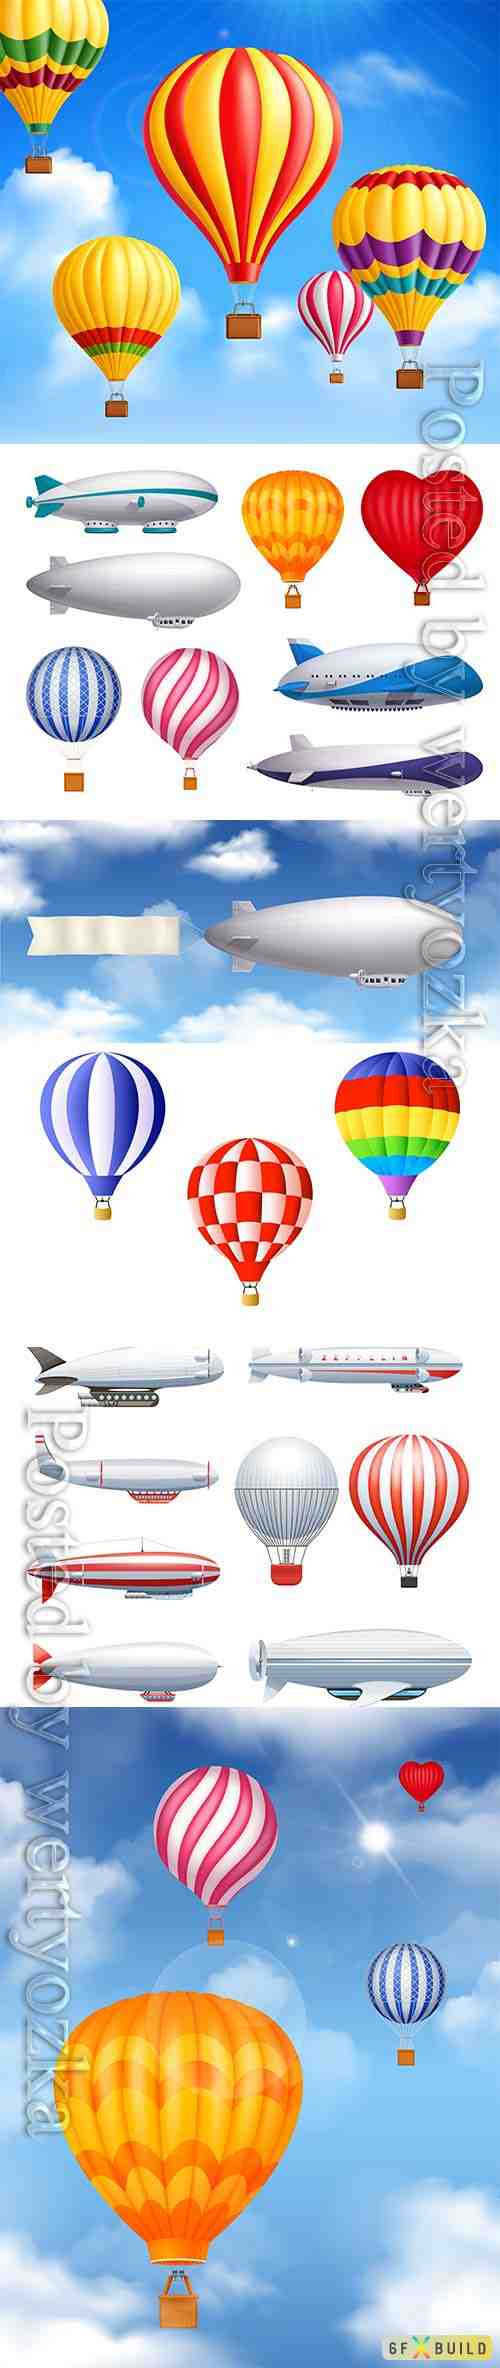 Dirigible and balloons transportation realistic vector set